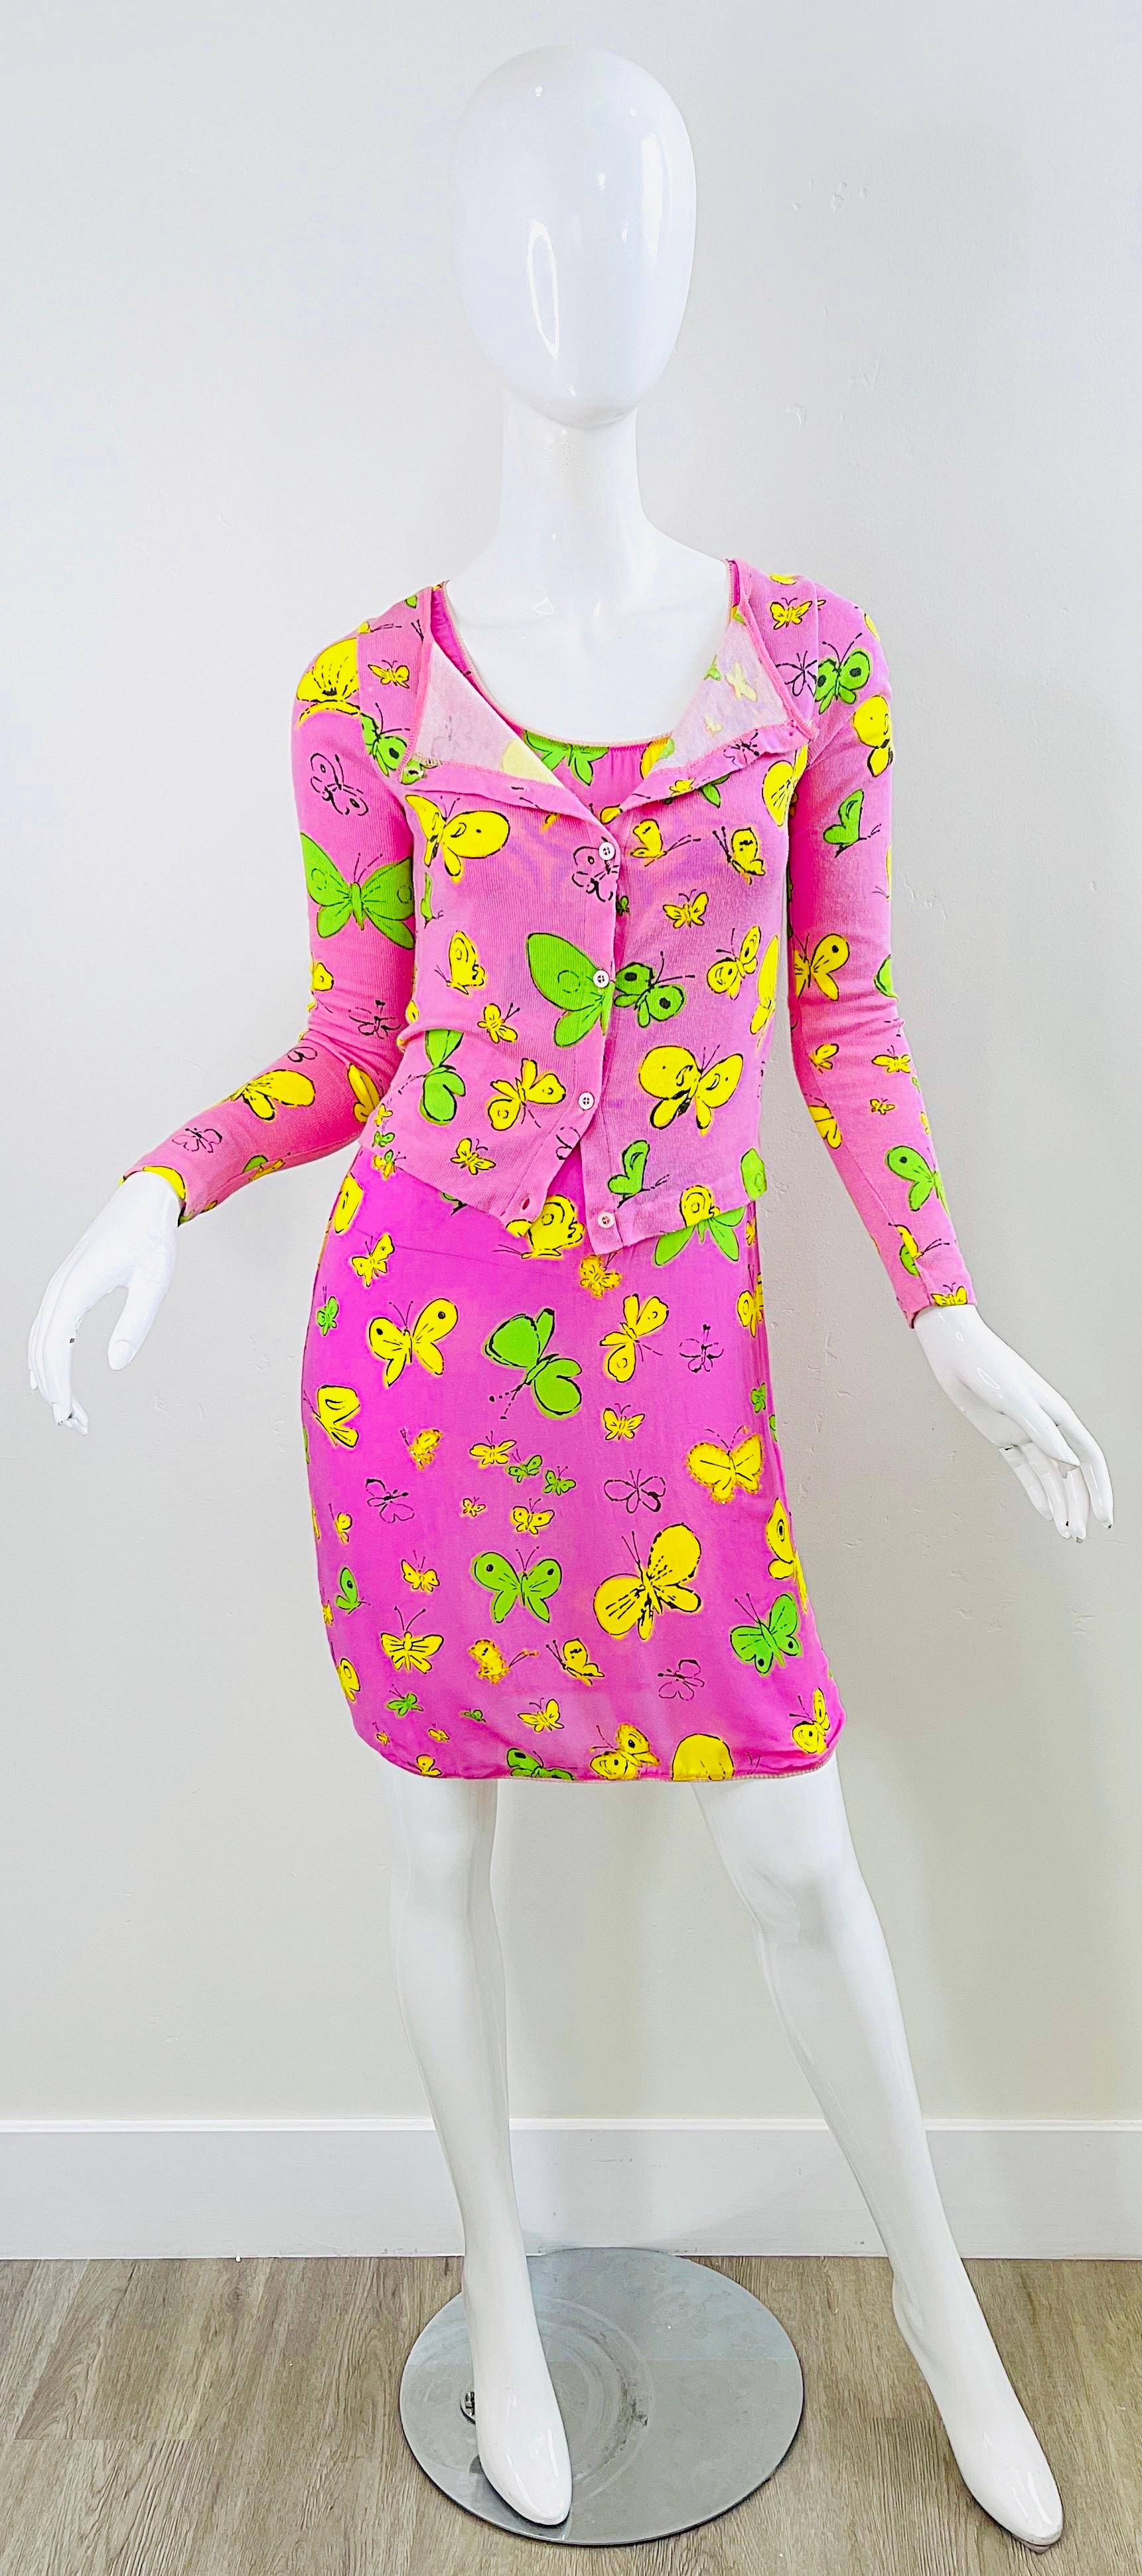 BARBIE 1990s Versus Gianni Versace Bubblegum Pink Beads Butterfly Dress Cardigan In Excellent Condition For Sale In San Diego, CA